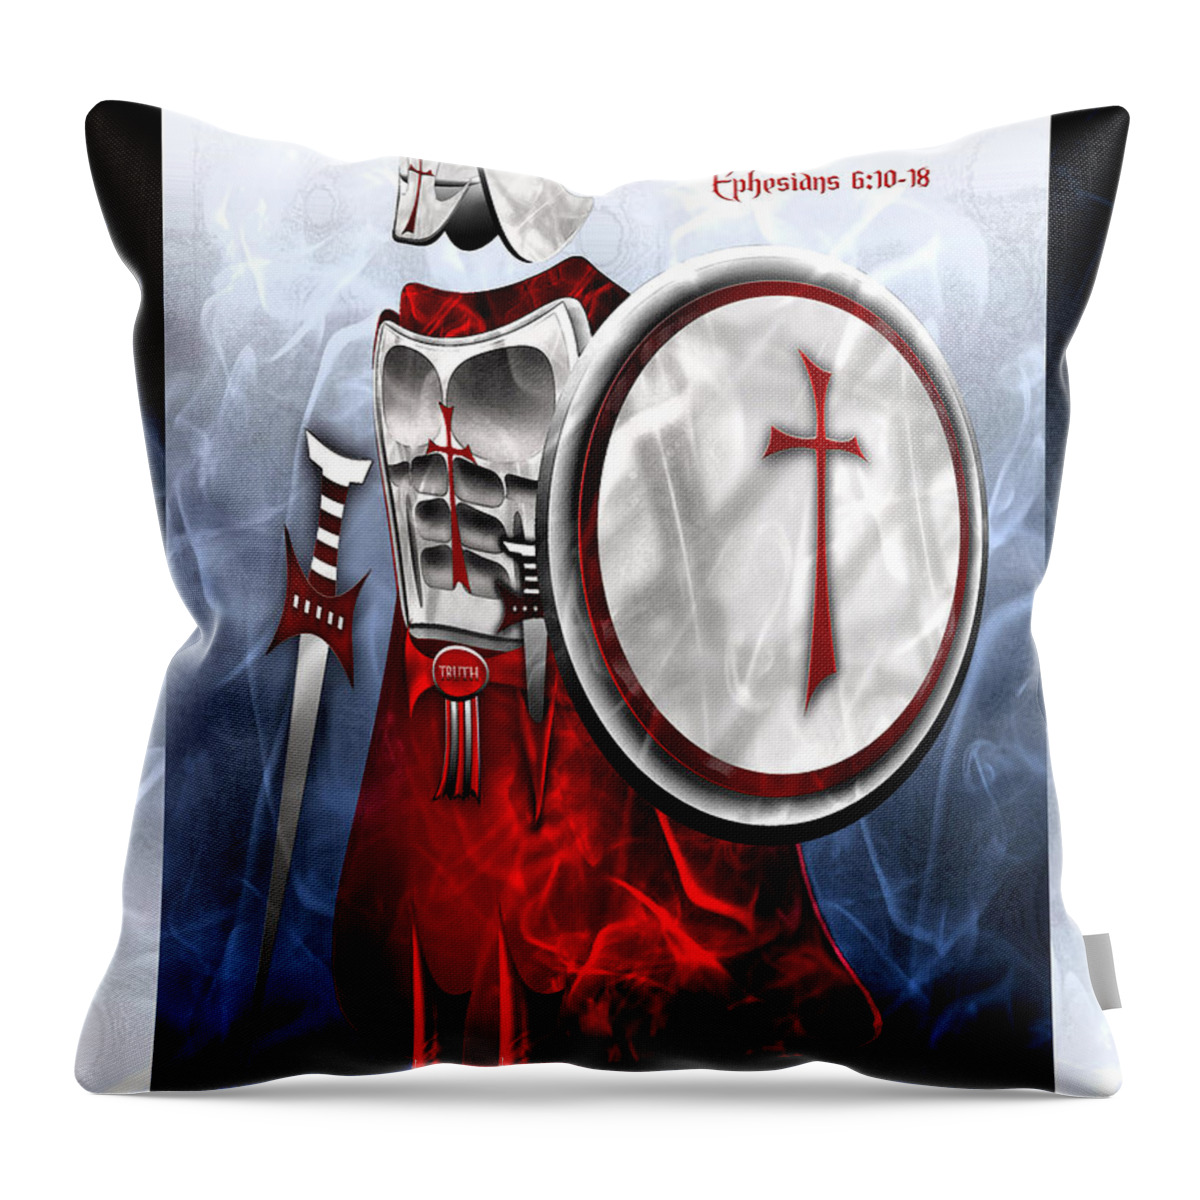 Full Armor Of God Throw Pillow featuring the digital art Full Armor of God by Jennifer Page